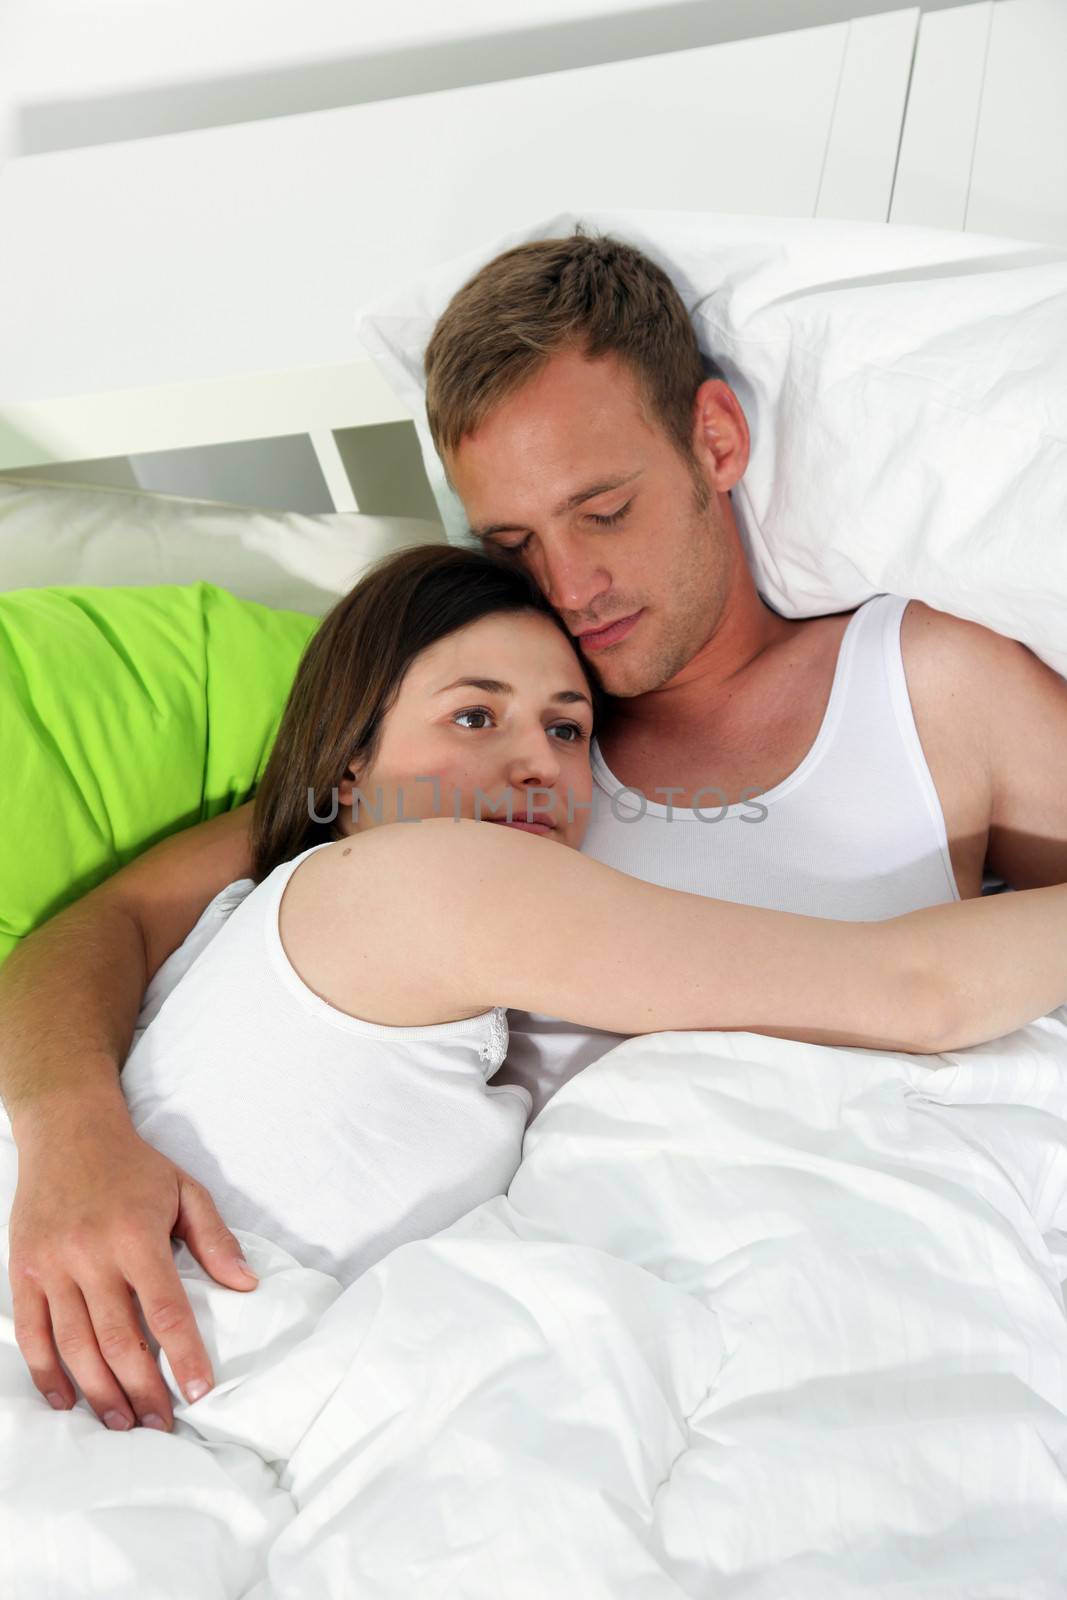 Young couple relaxing together in bed entwined in each others arms with the husband already falling asleep while his wife lies thinking